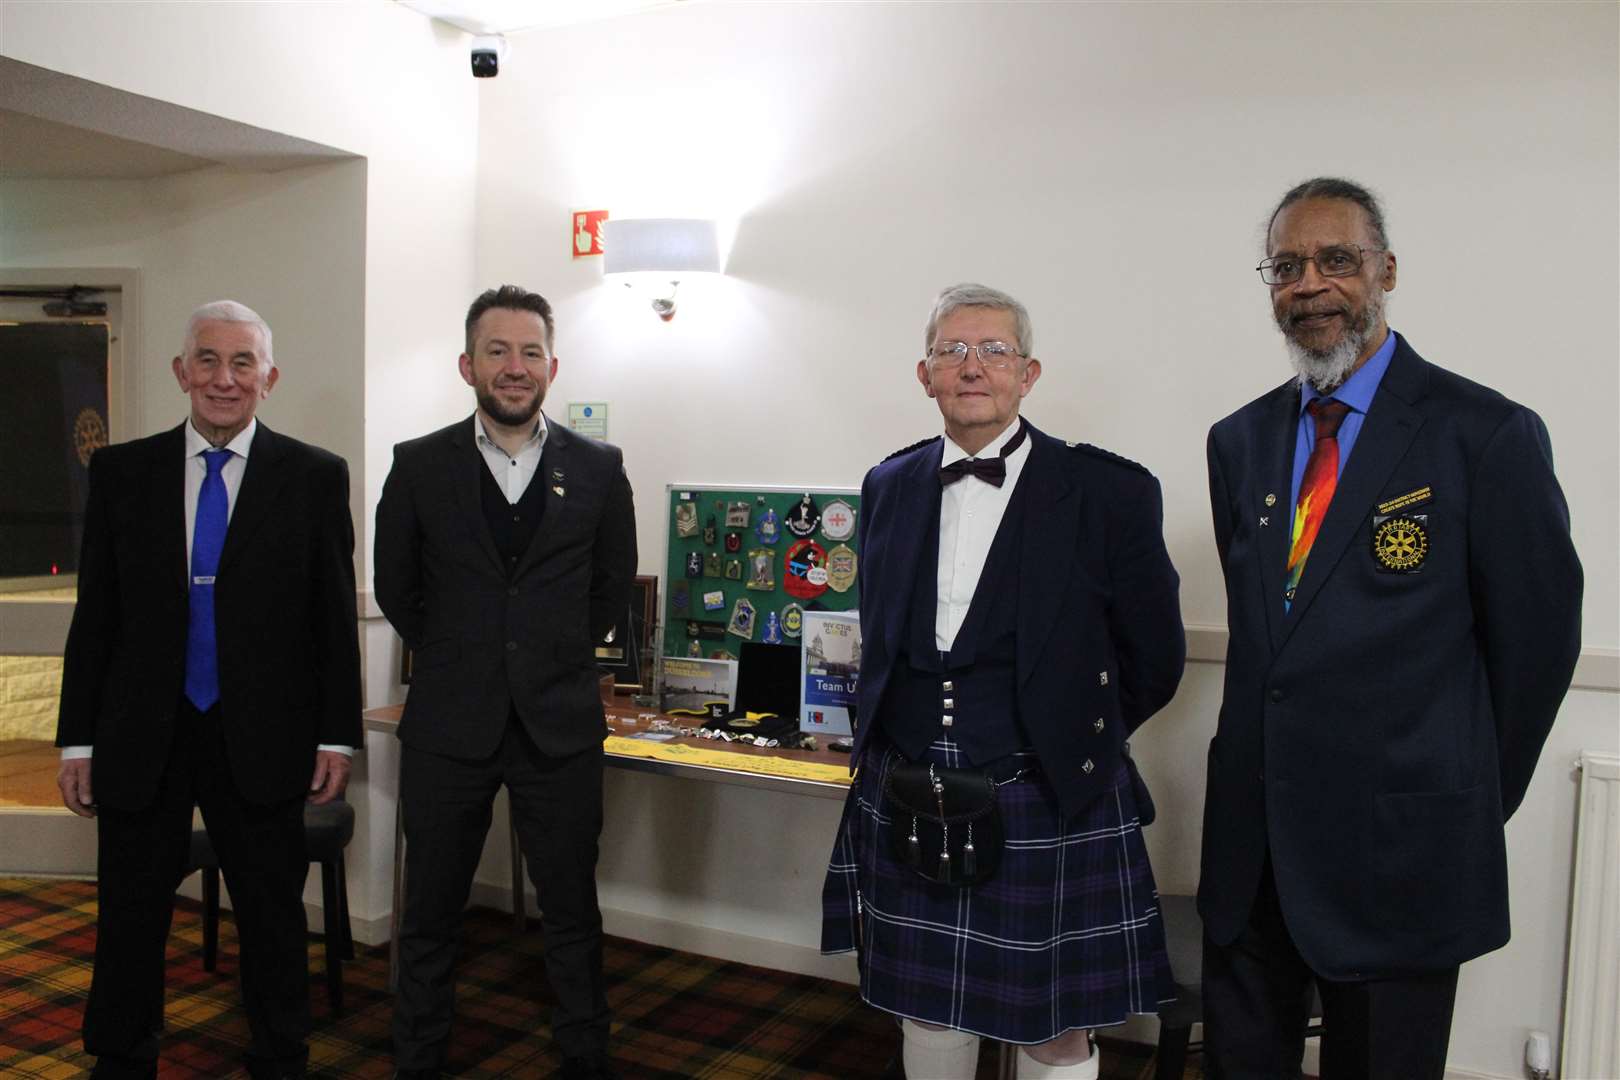 At the Celebrating Banffshire fundraiser (from left) are Dave Curry from Diabetes Scotland, Invictus Games athlete David Jarvis, Rotary Club of Banff president John Calder and Rotary 1010 district governor Jim Hatter.